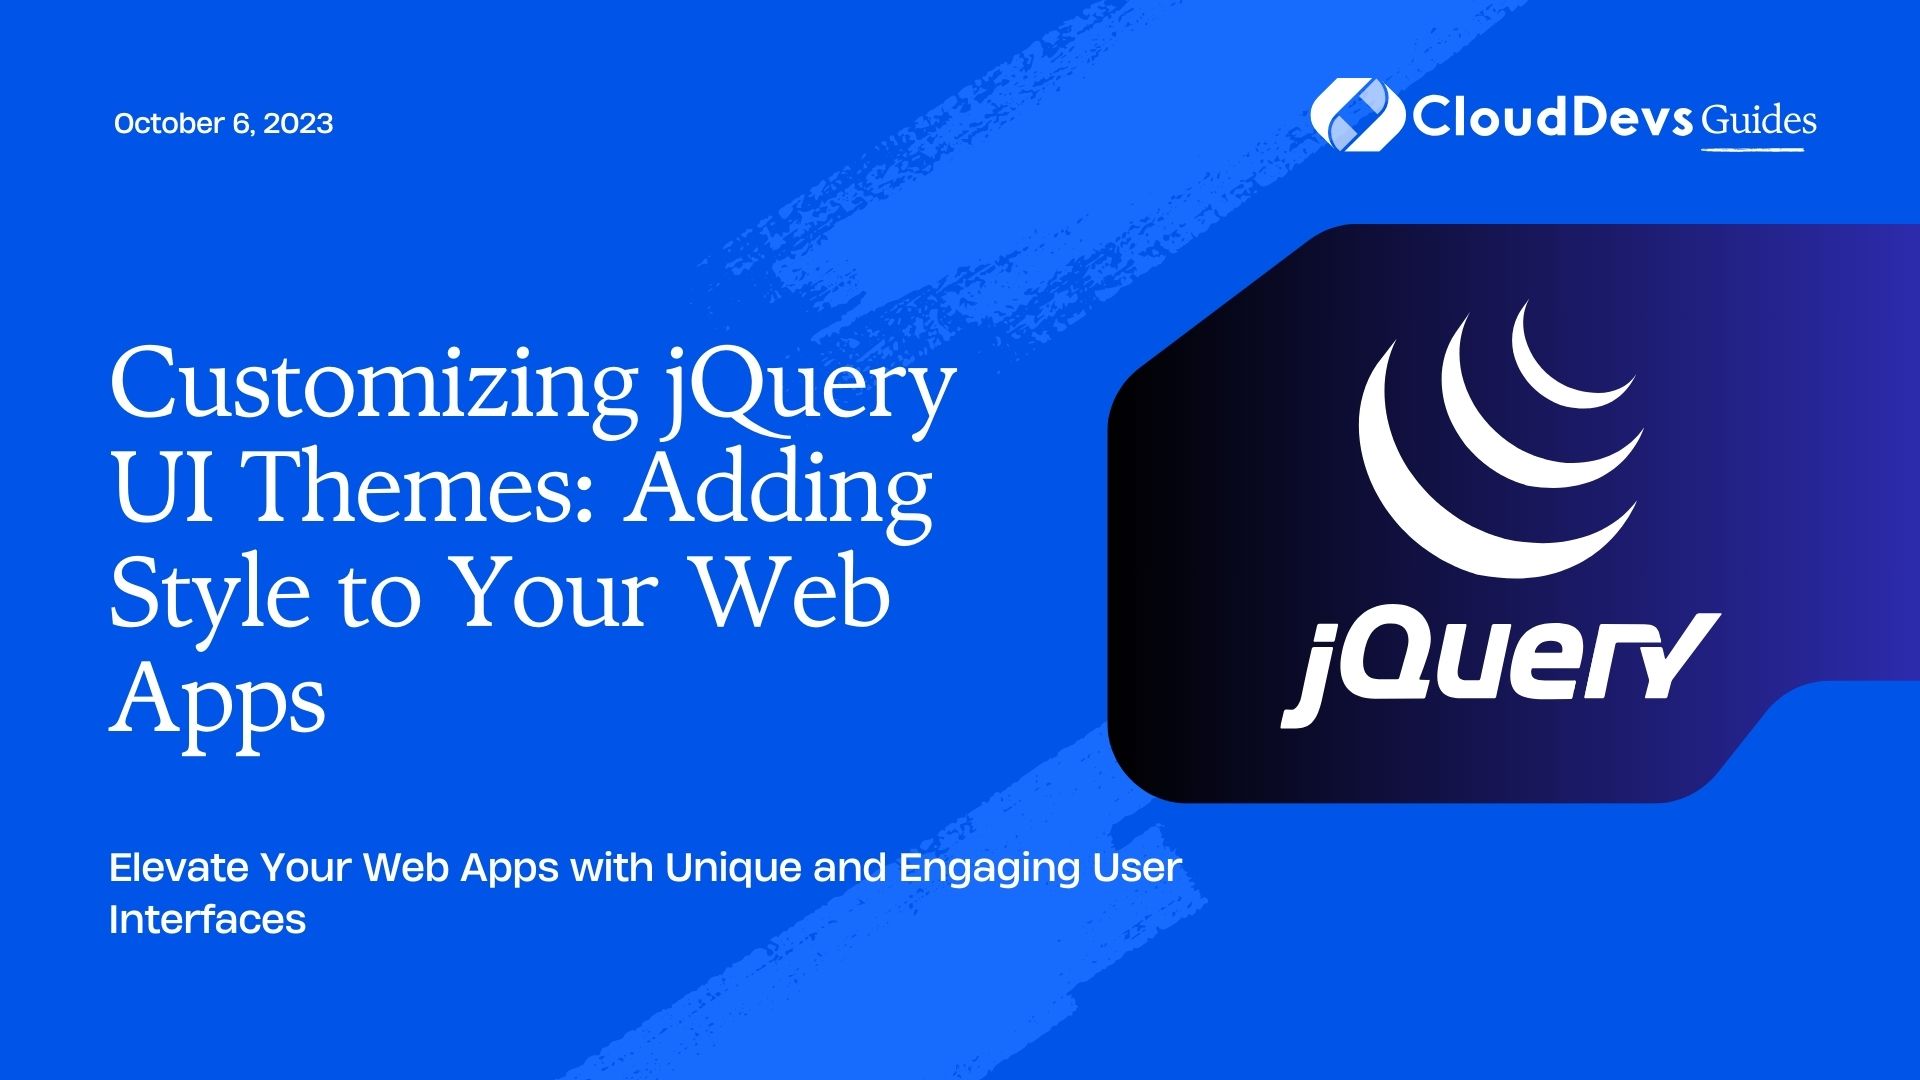 Customizing jQuery UI Themes: Adding Style to Your Web Apps